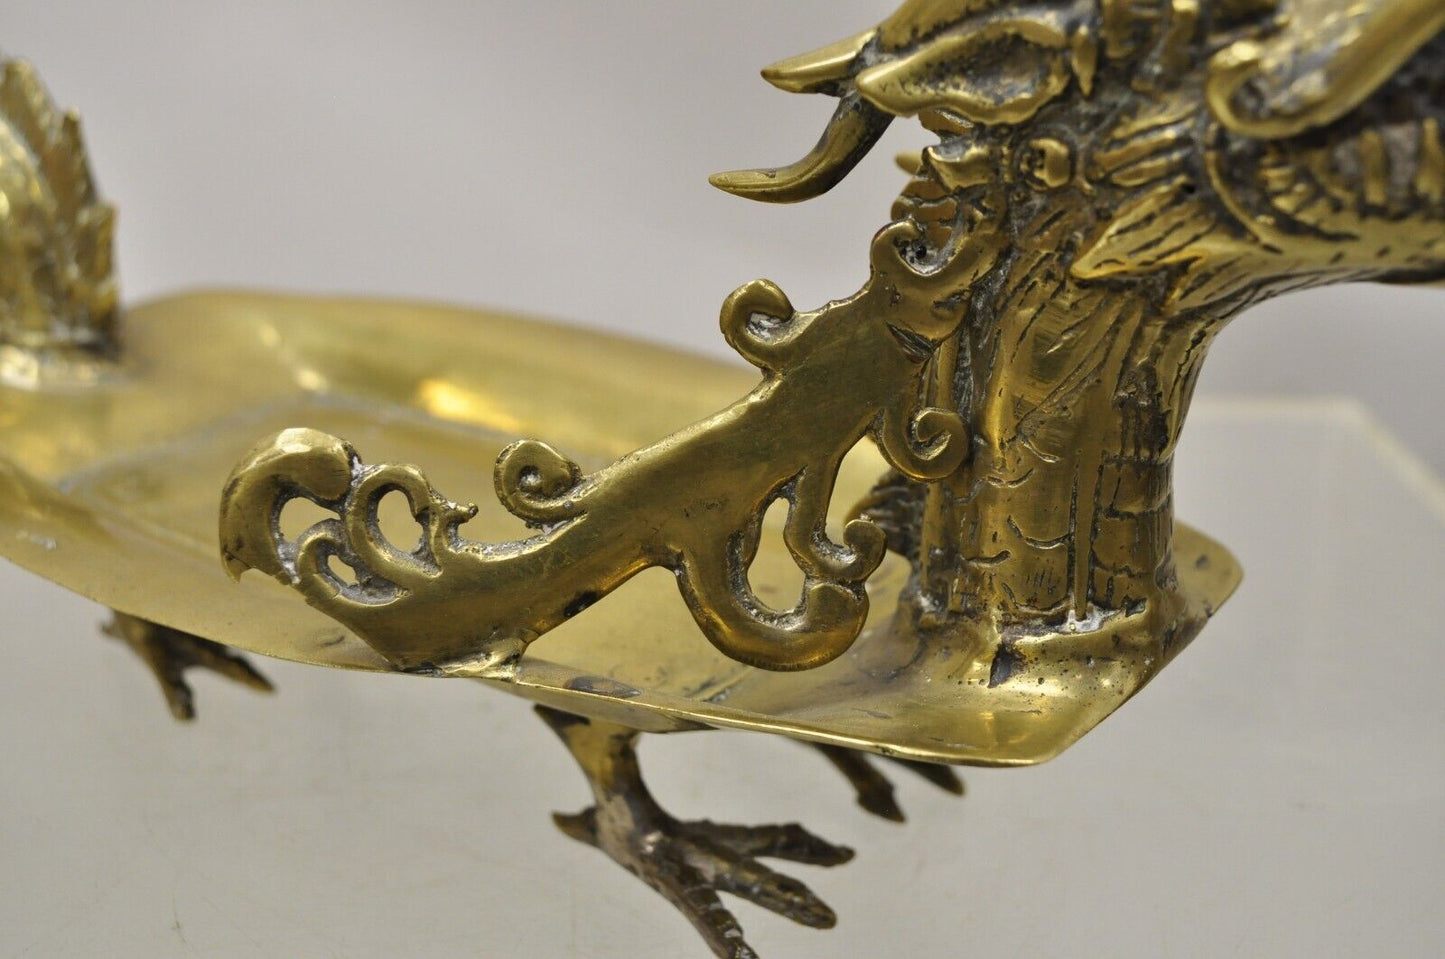 Vintage Solid Brass Dragon Form Chinese Trinket Dish Desk Accessory